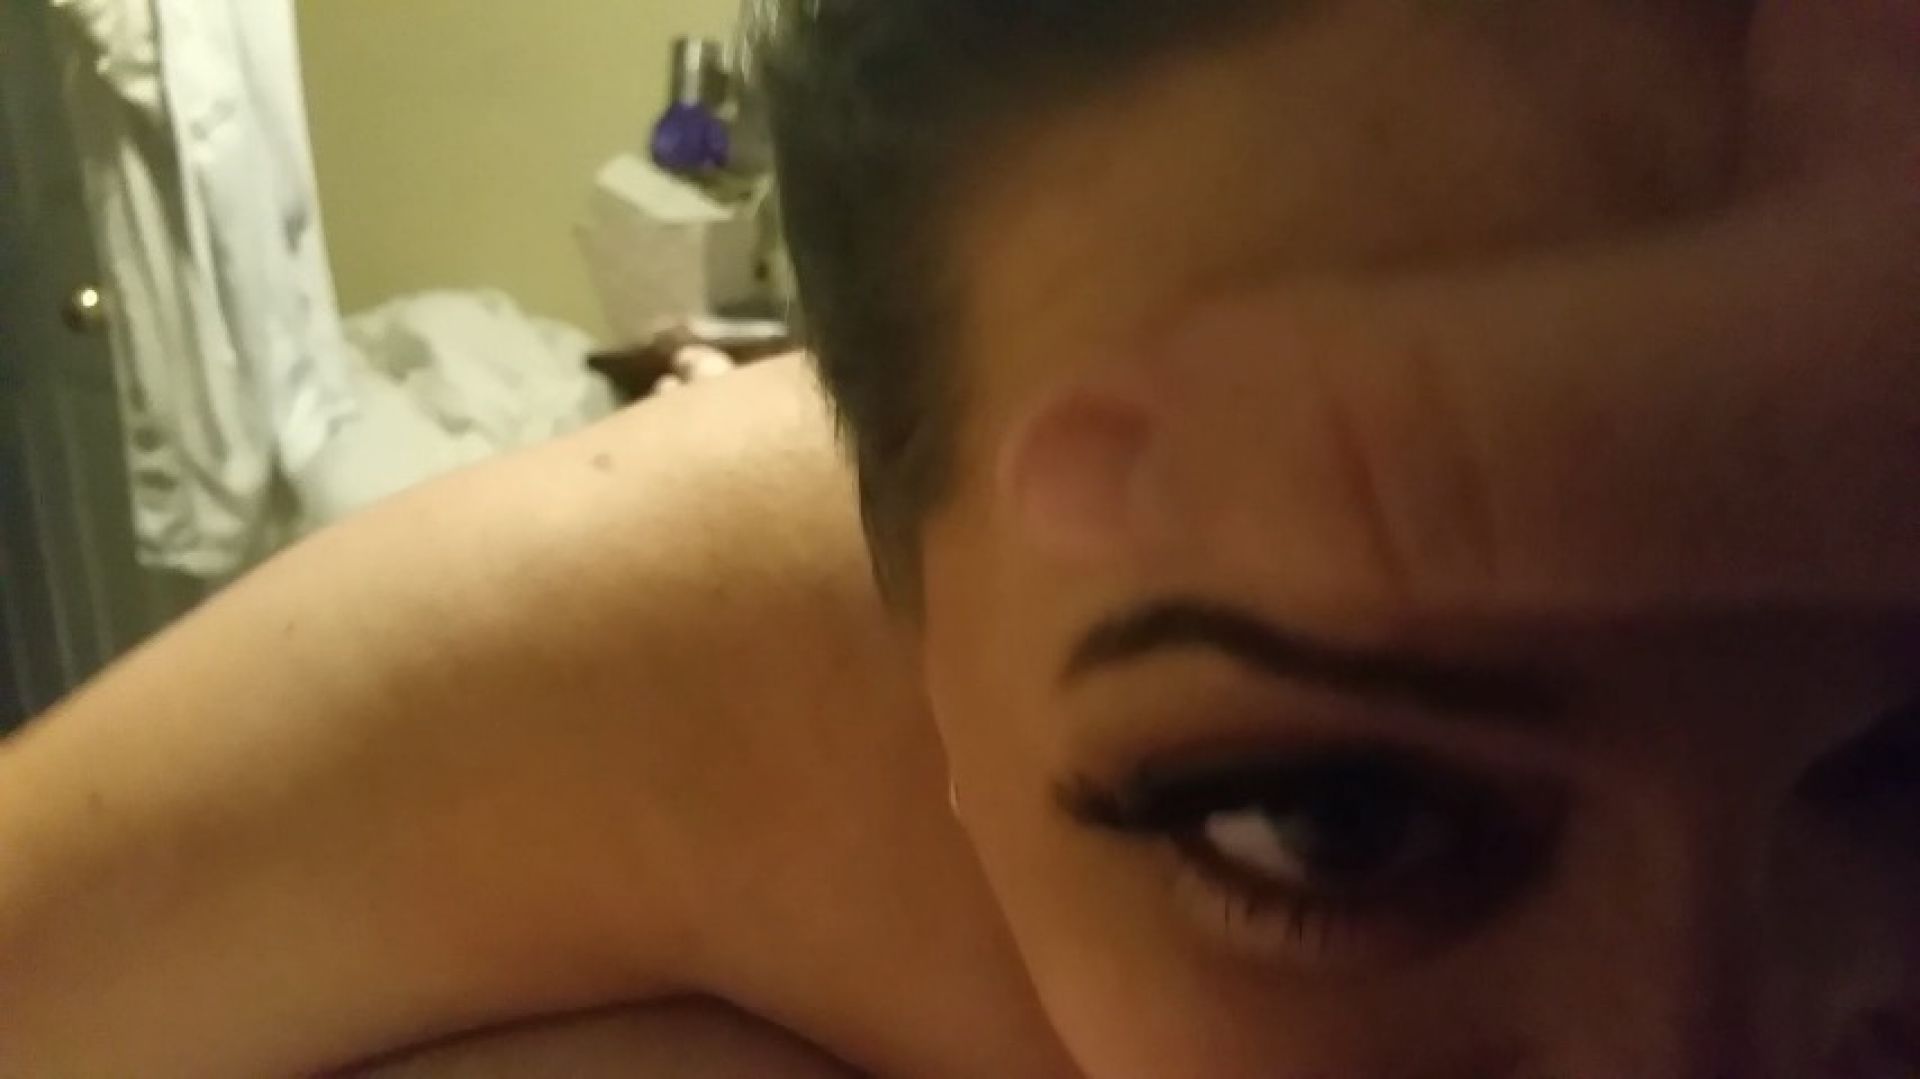 Great amatuer blowjob with face fuck ending